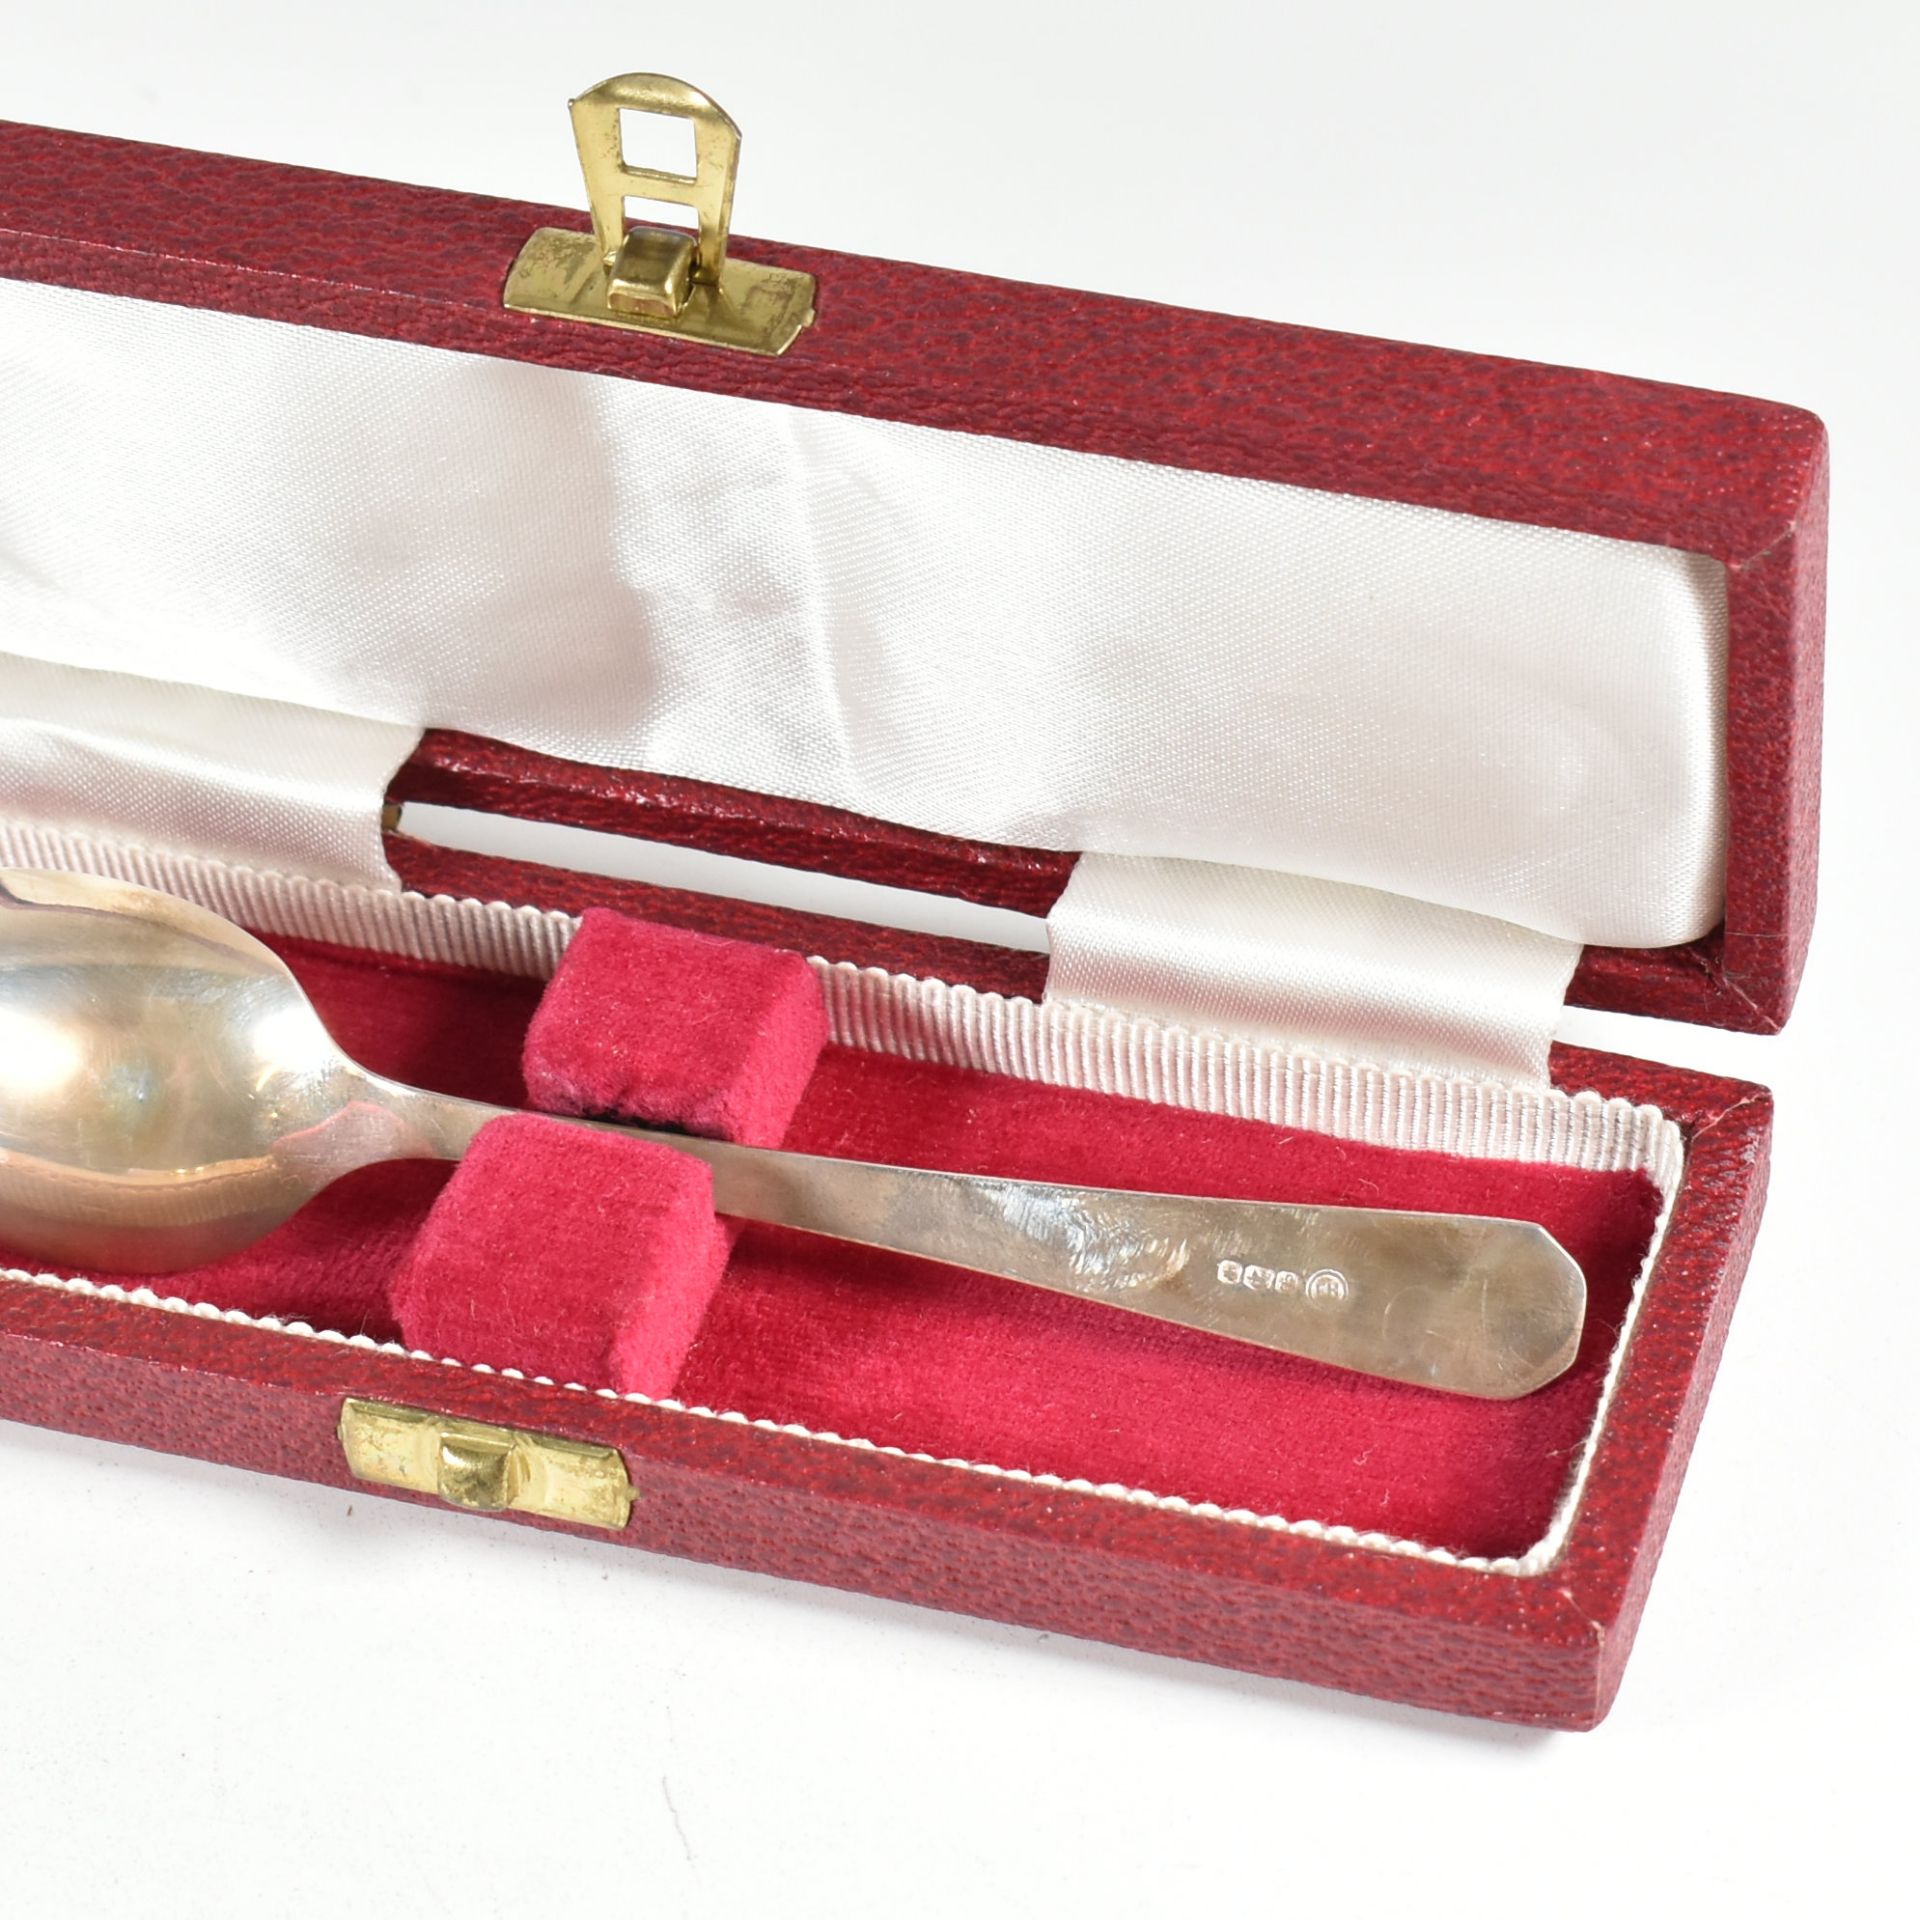 EARLY 20TH CENTURY HALLMARKED SILVER FLATWARE ITEMS - Image 11 of 11